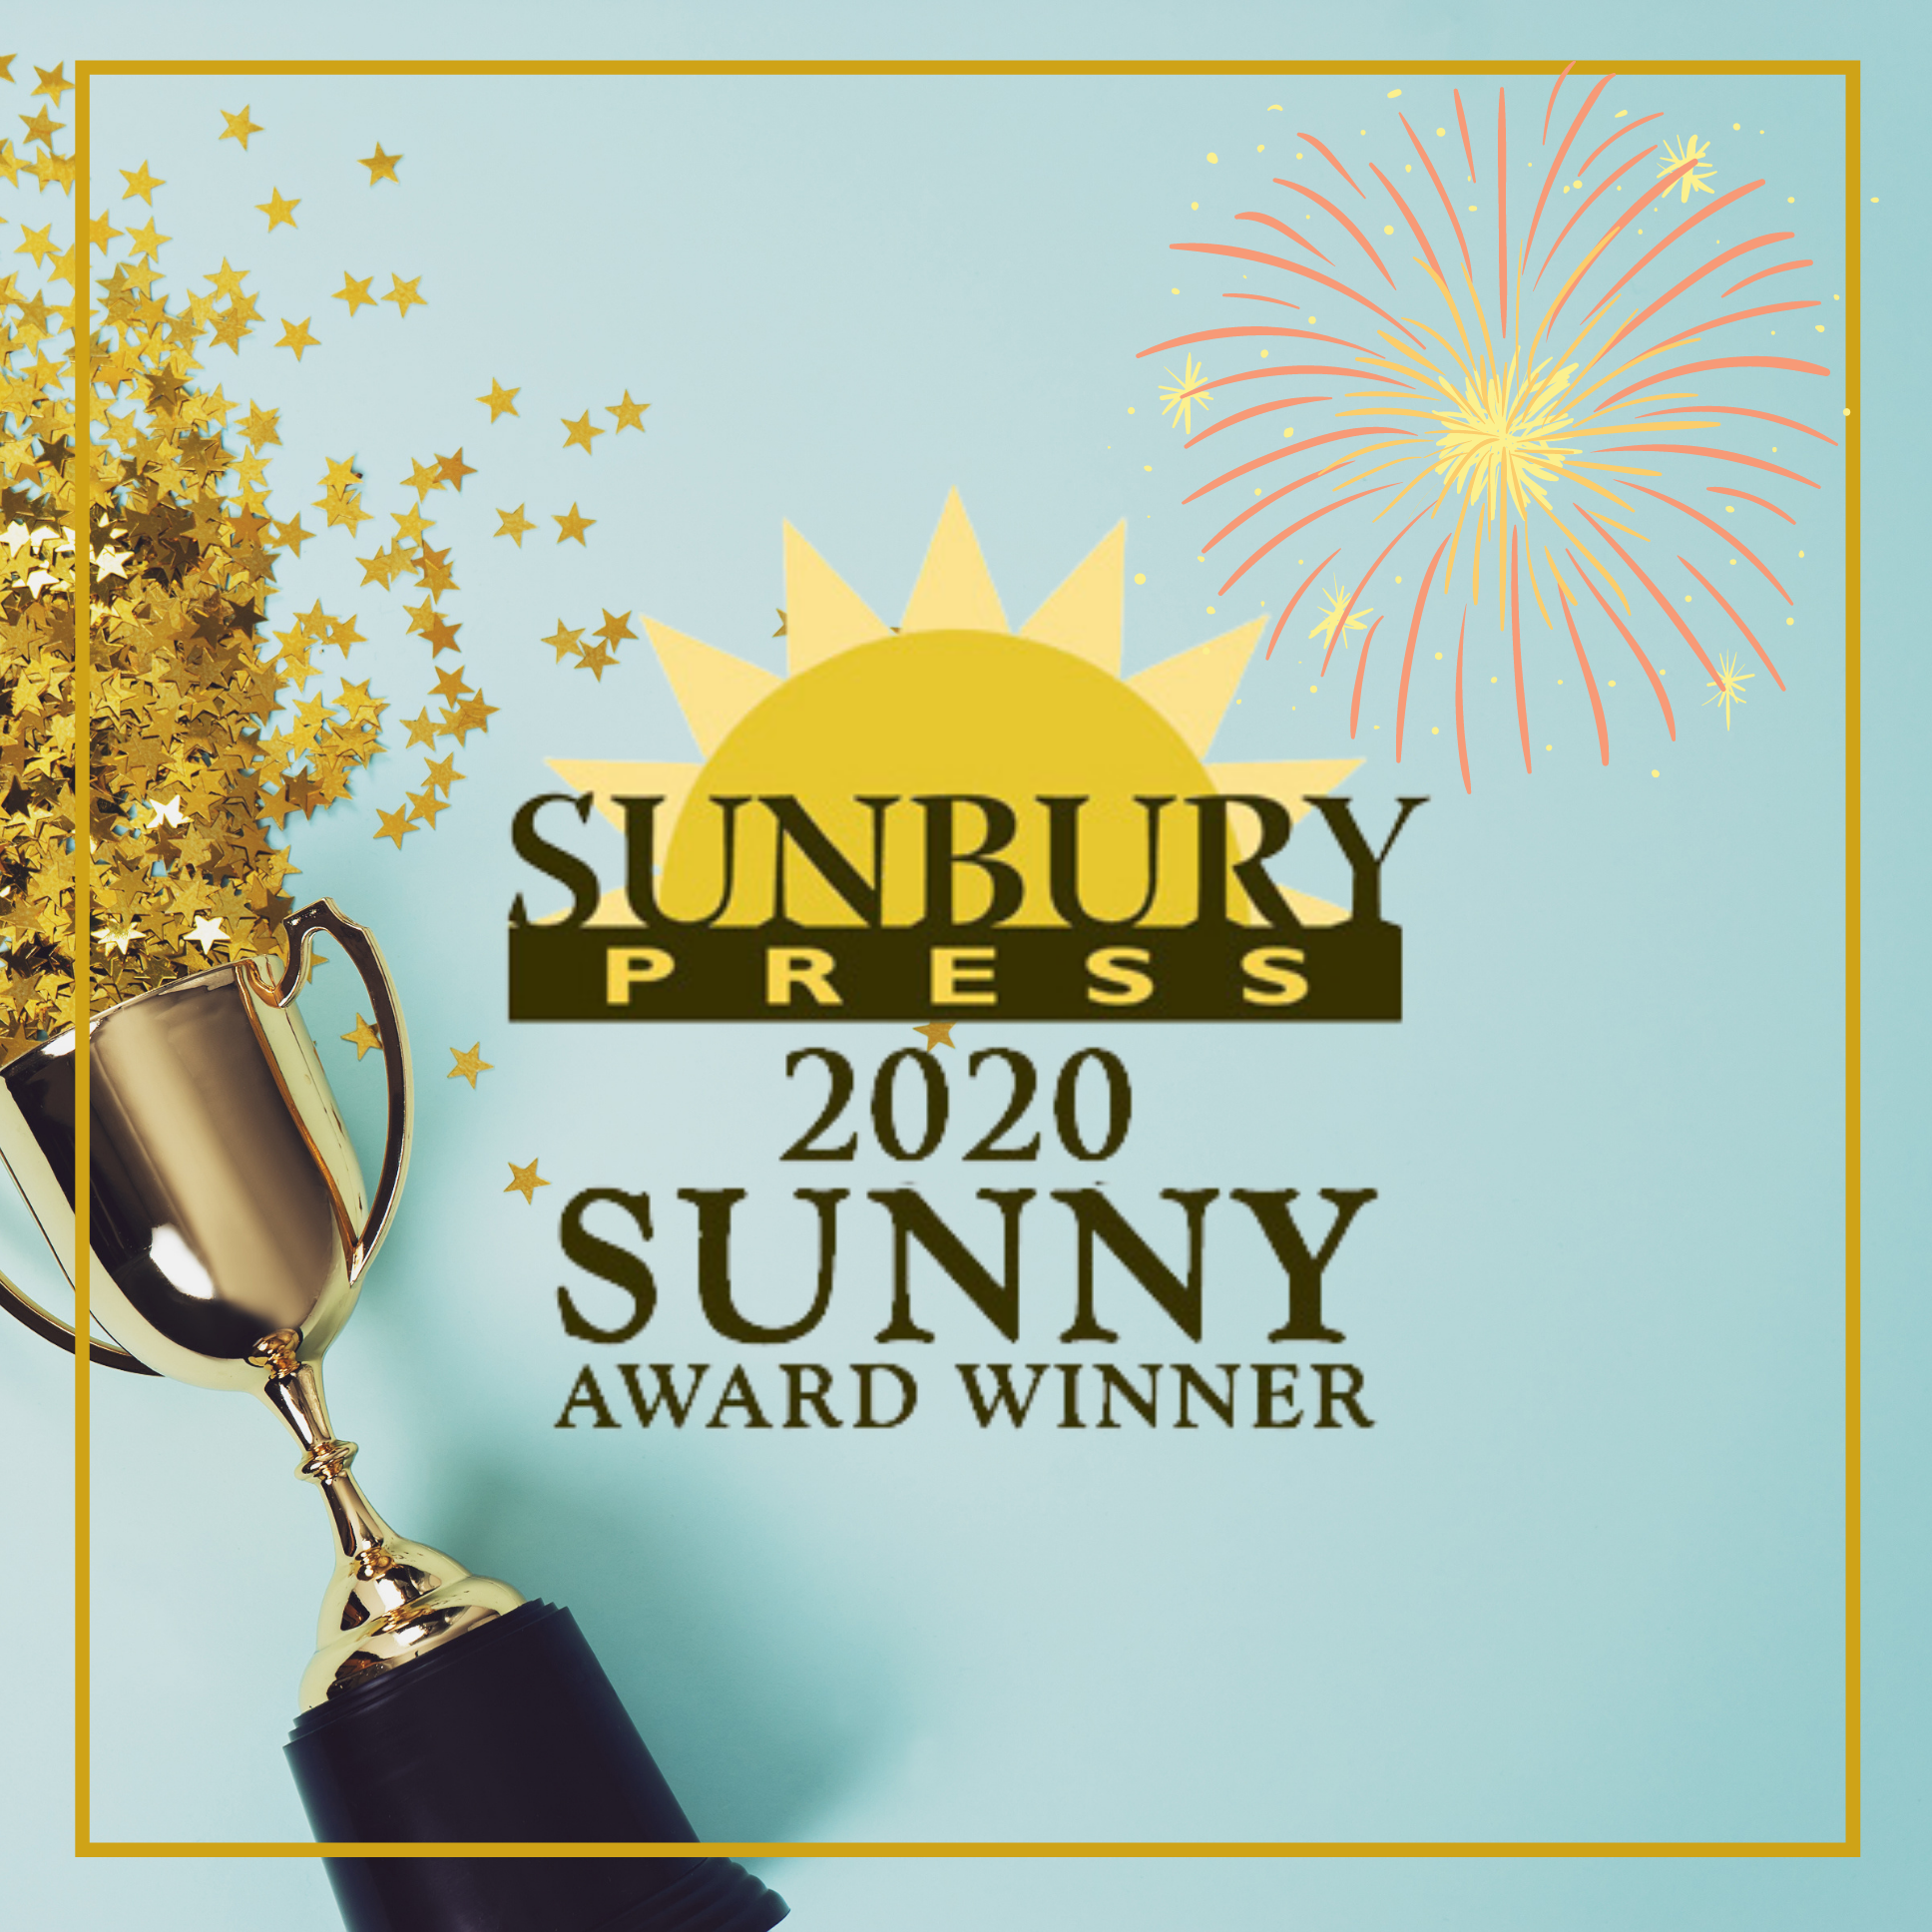 Announcing the 2020 SUNNY Award Winners